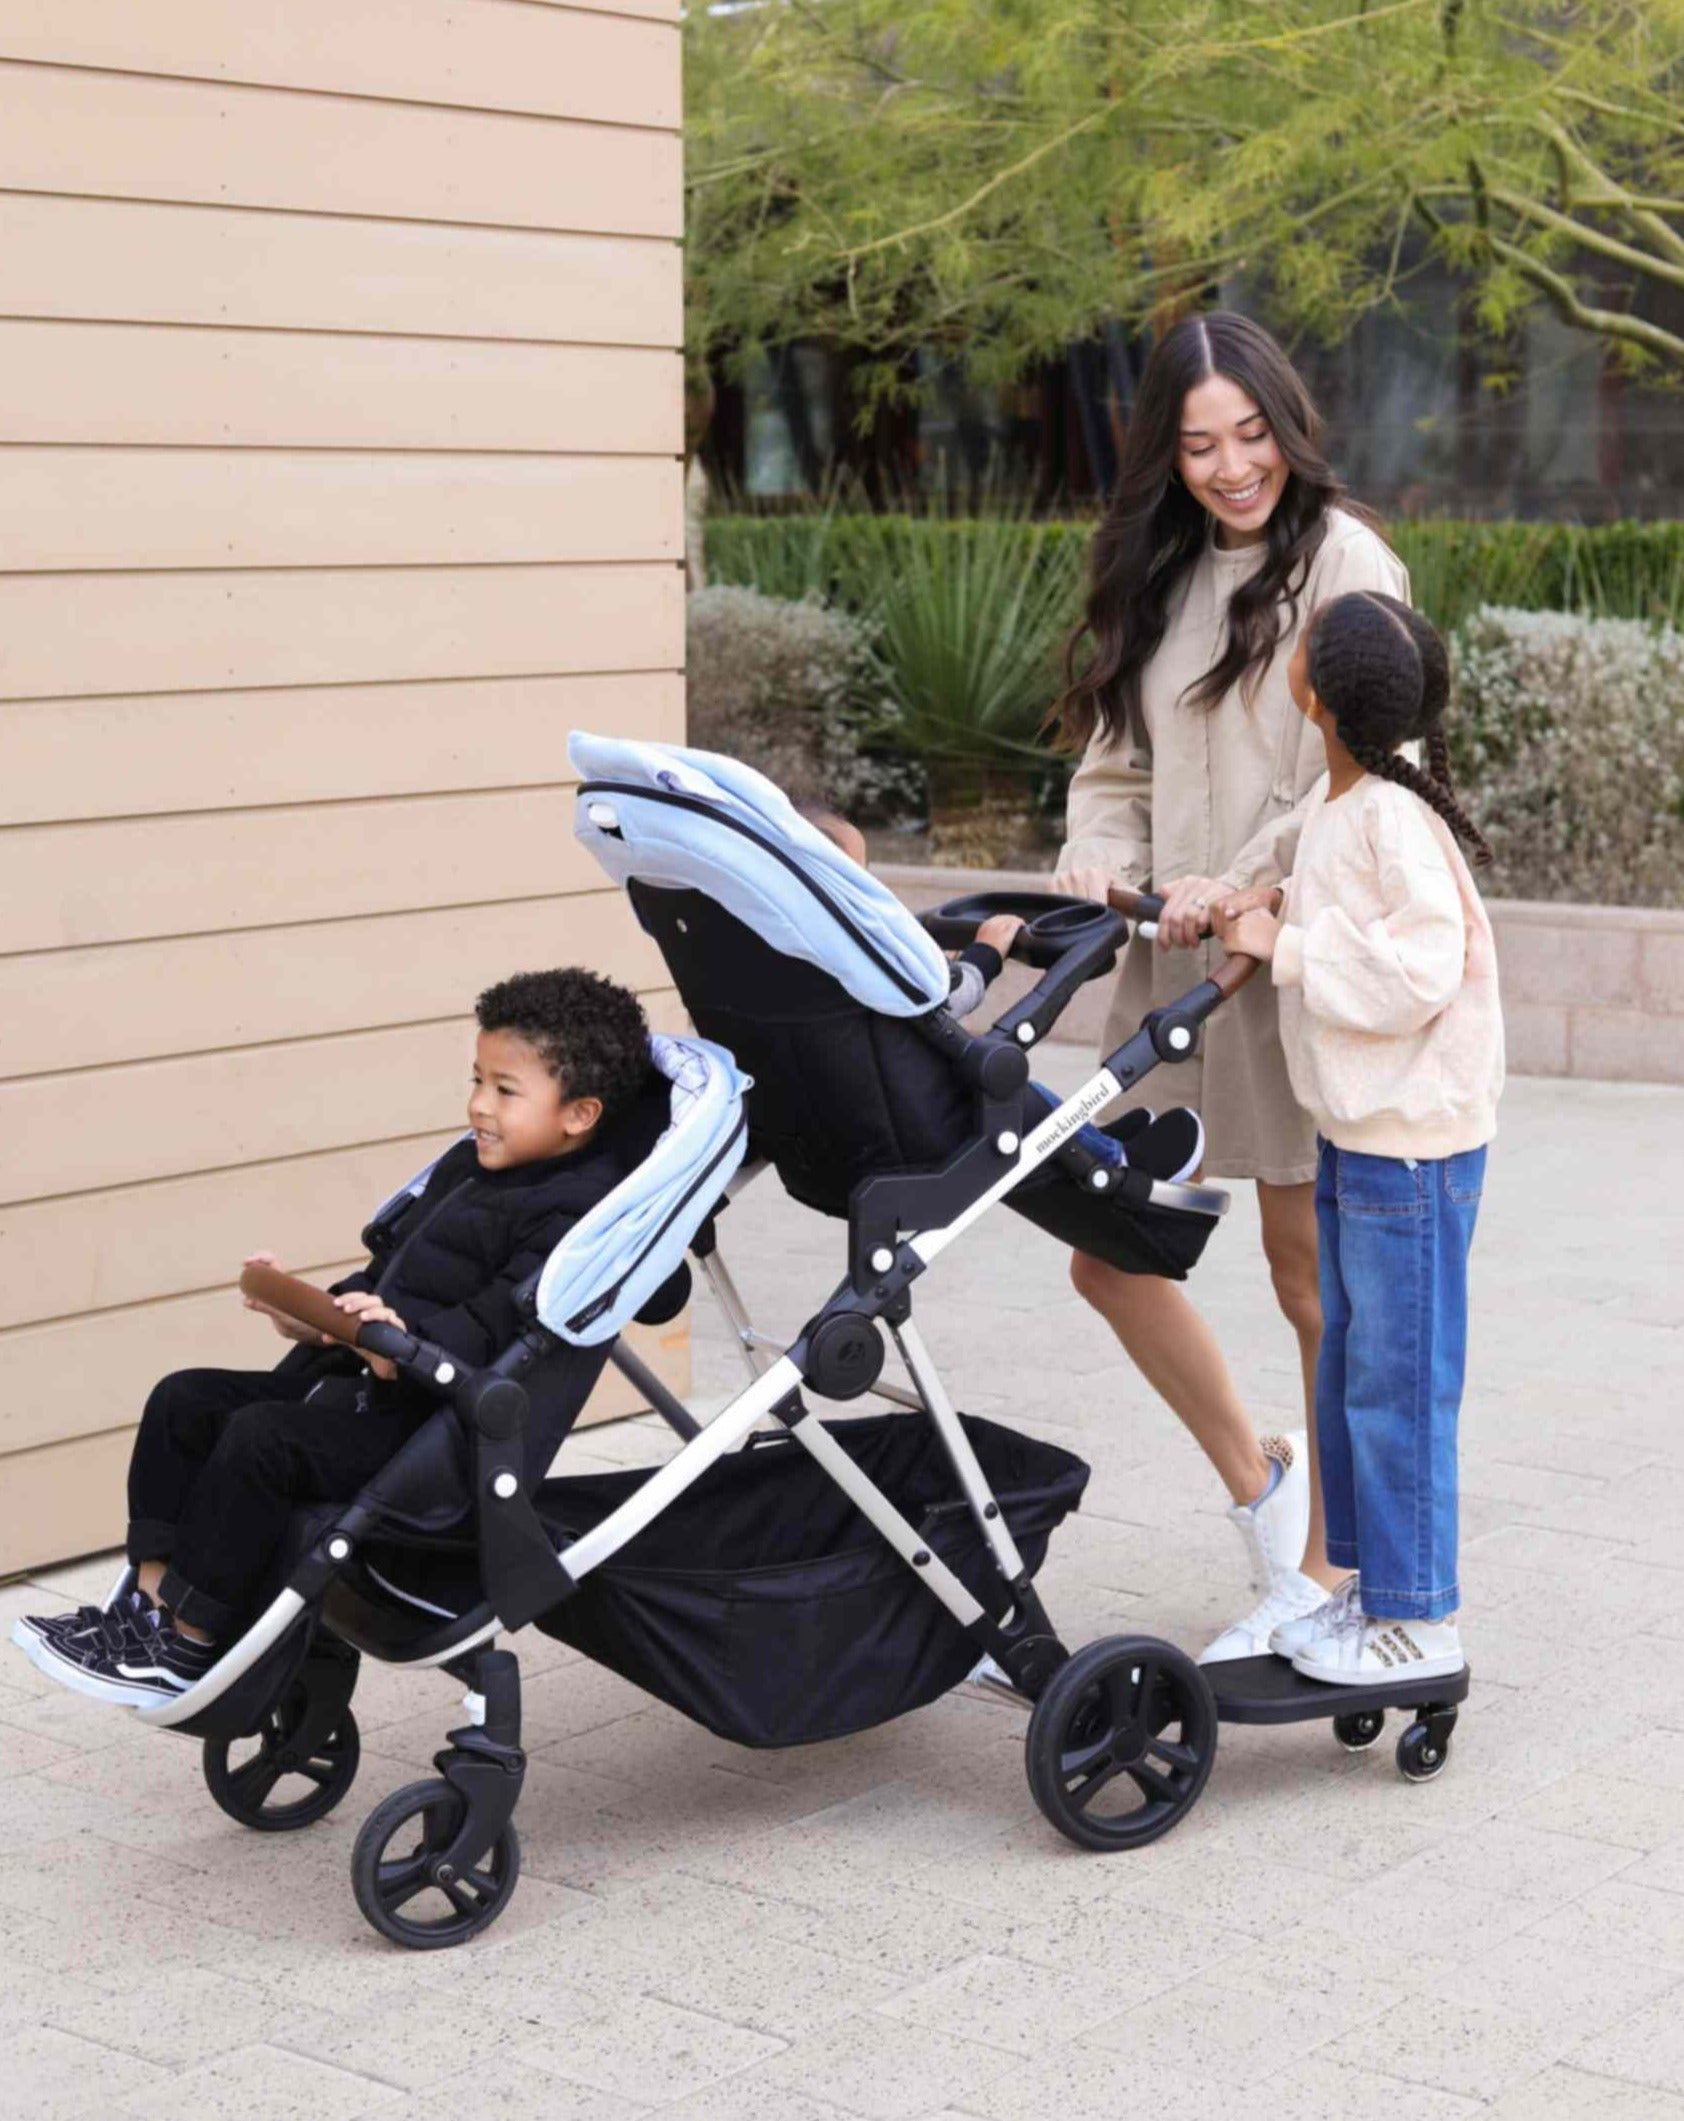 Mockingbird Stroller | Riding board with single to double stroller and 3 kids and older child standing up